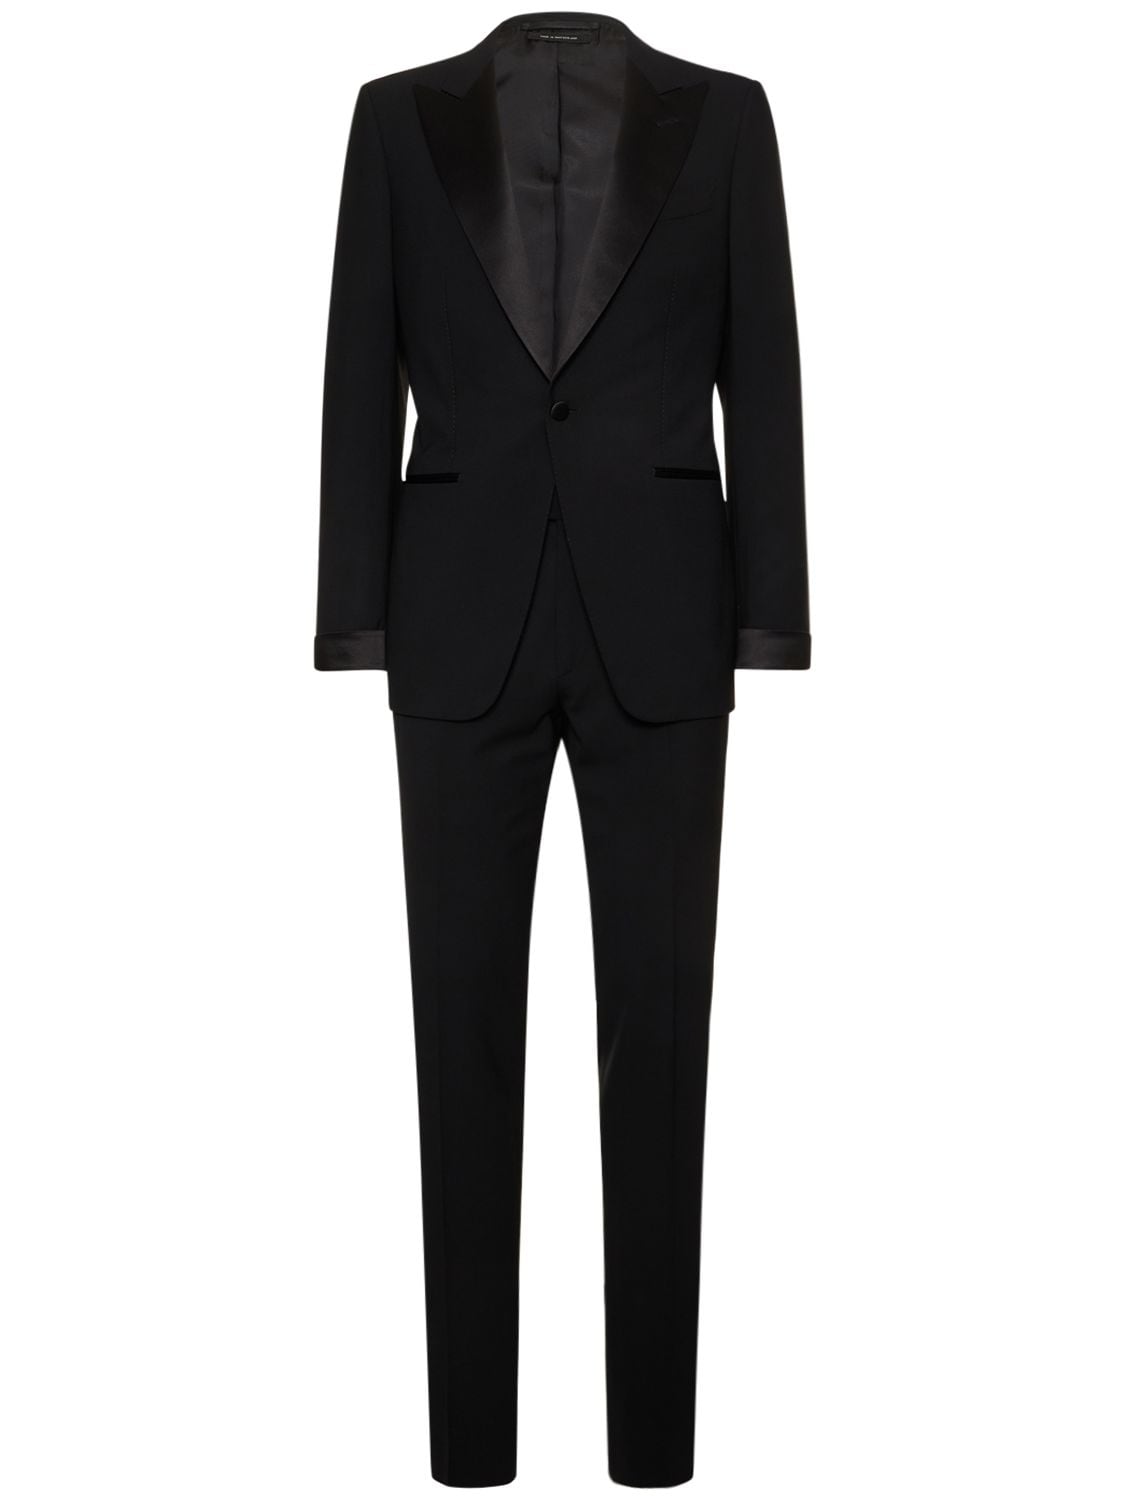 Tom Ford O'connor Stretch Wool Plain Weave Suit In Black